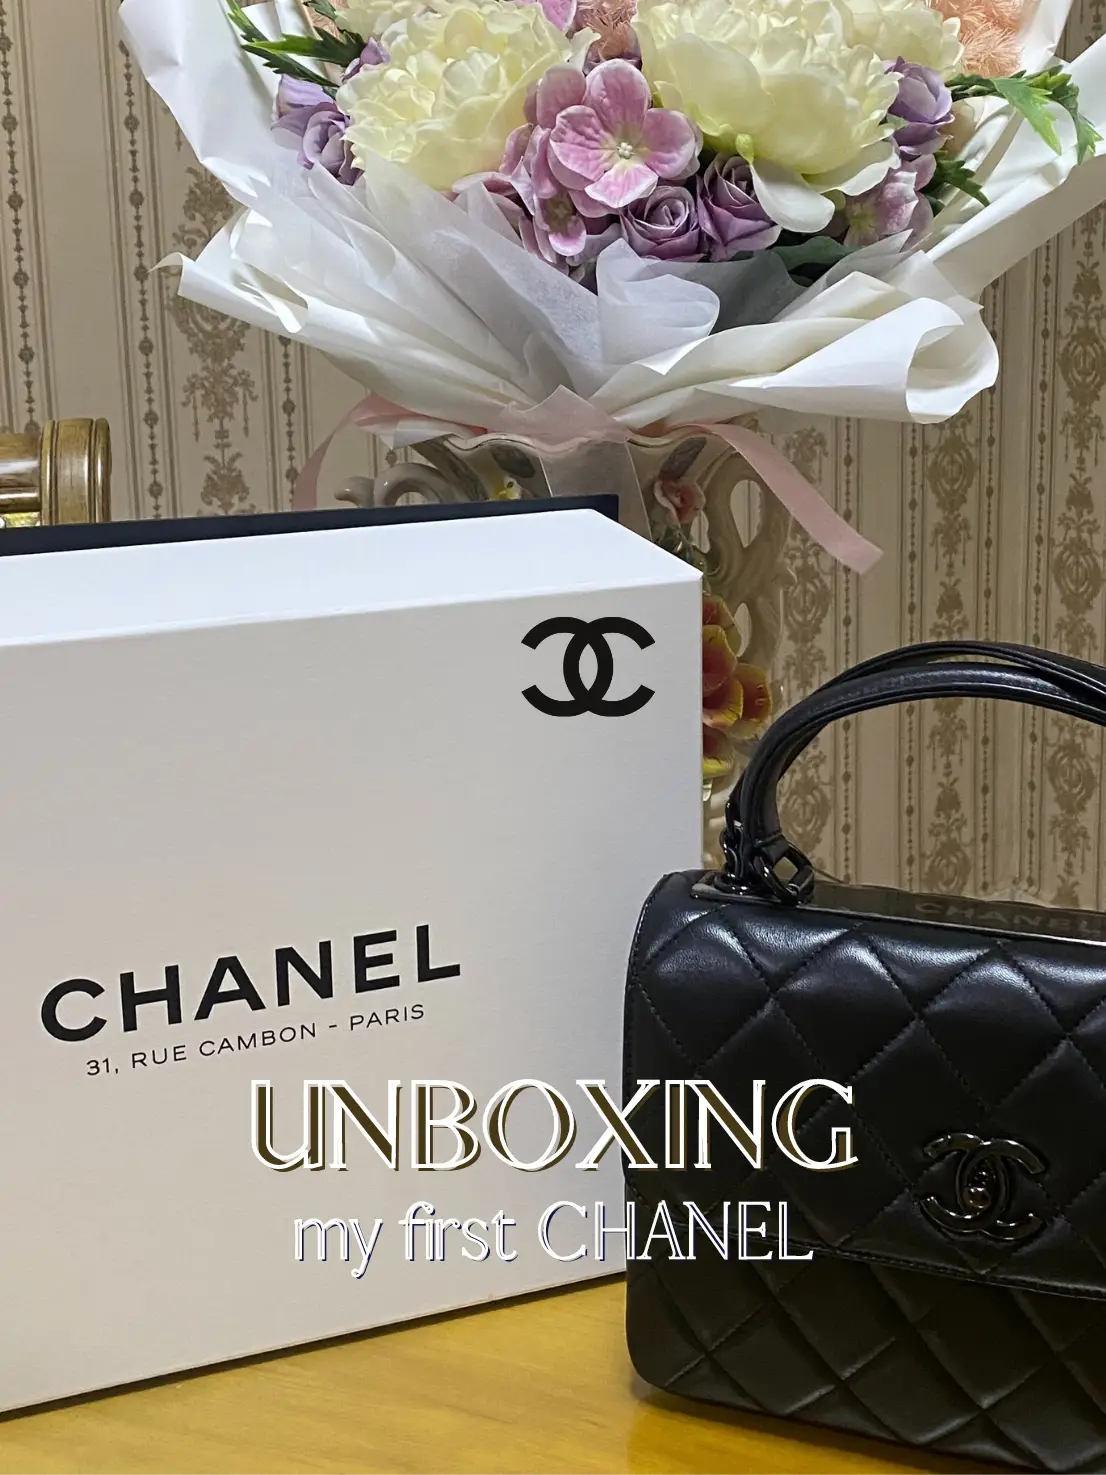 Unbox the most wanted Chanel bag of this season. The Chanel Coco first